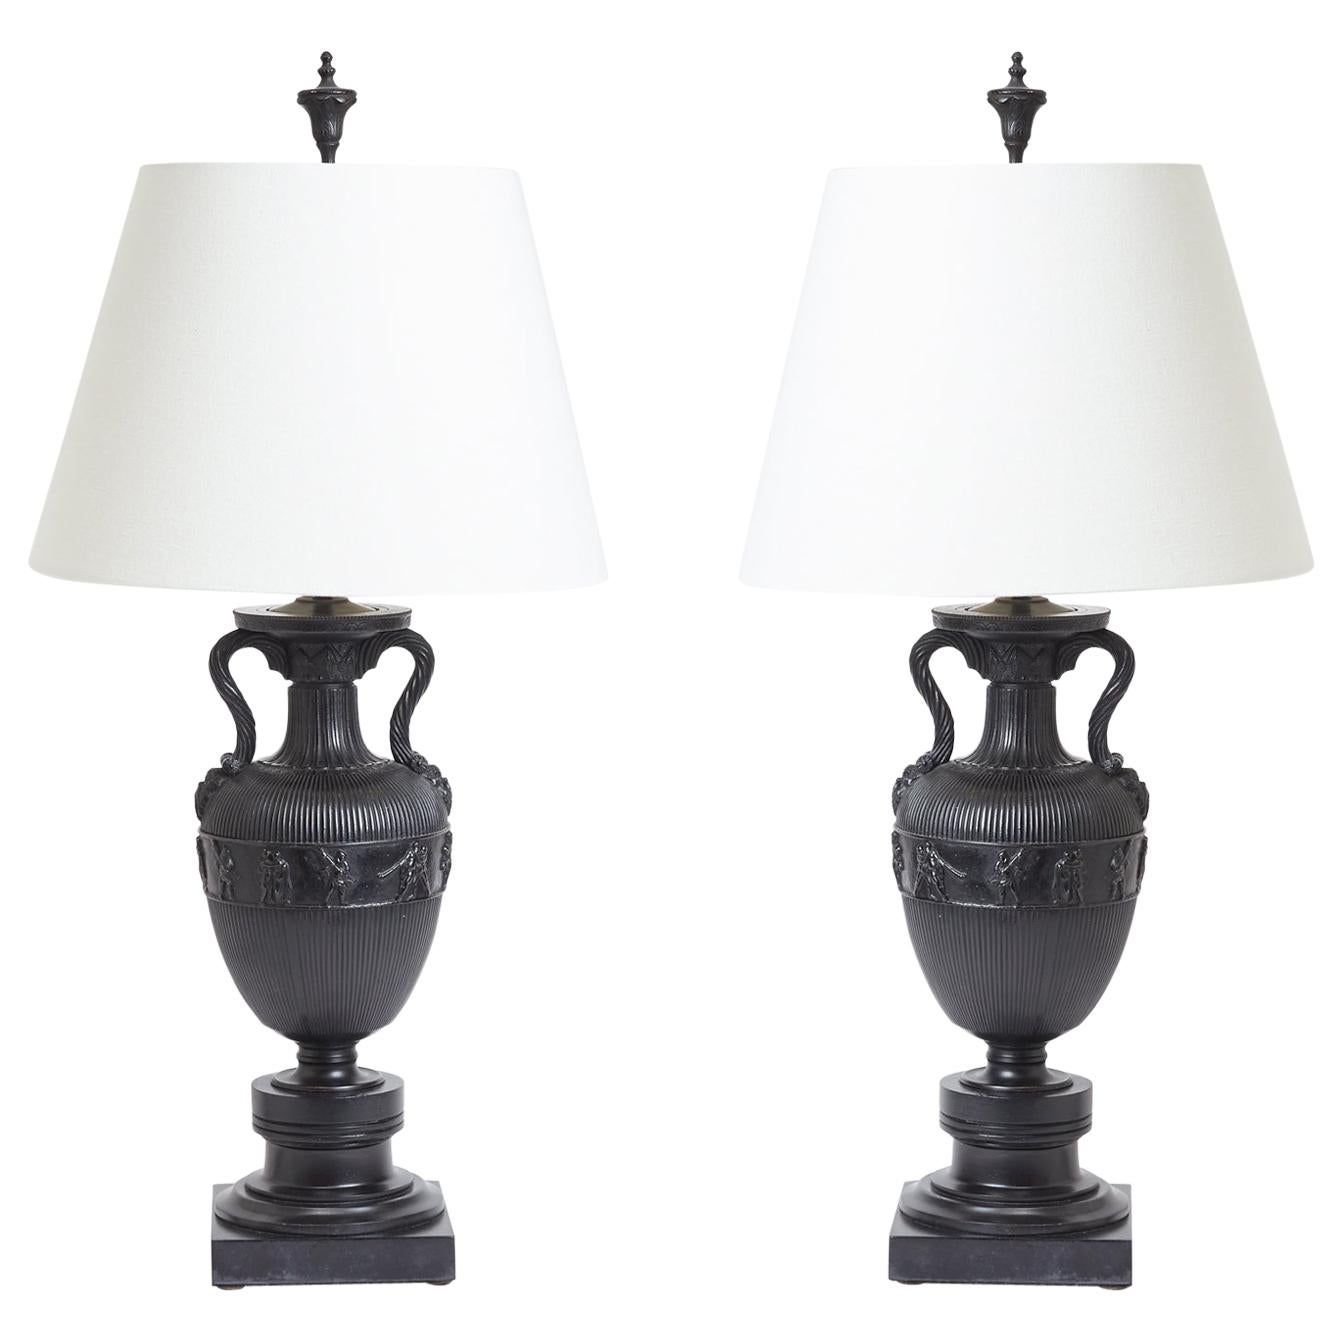 Pair of Neoclassical Urns Mounted as Table Lamps